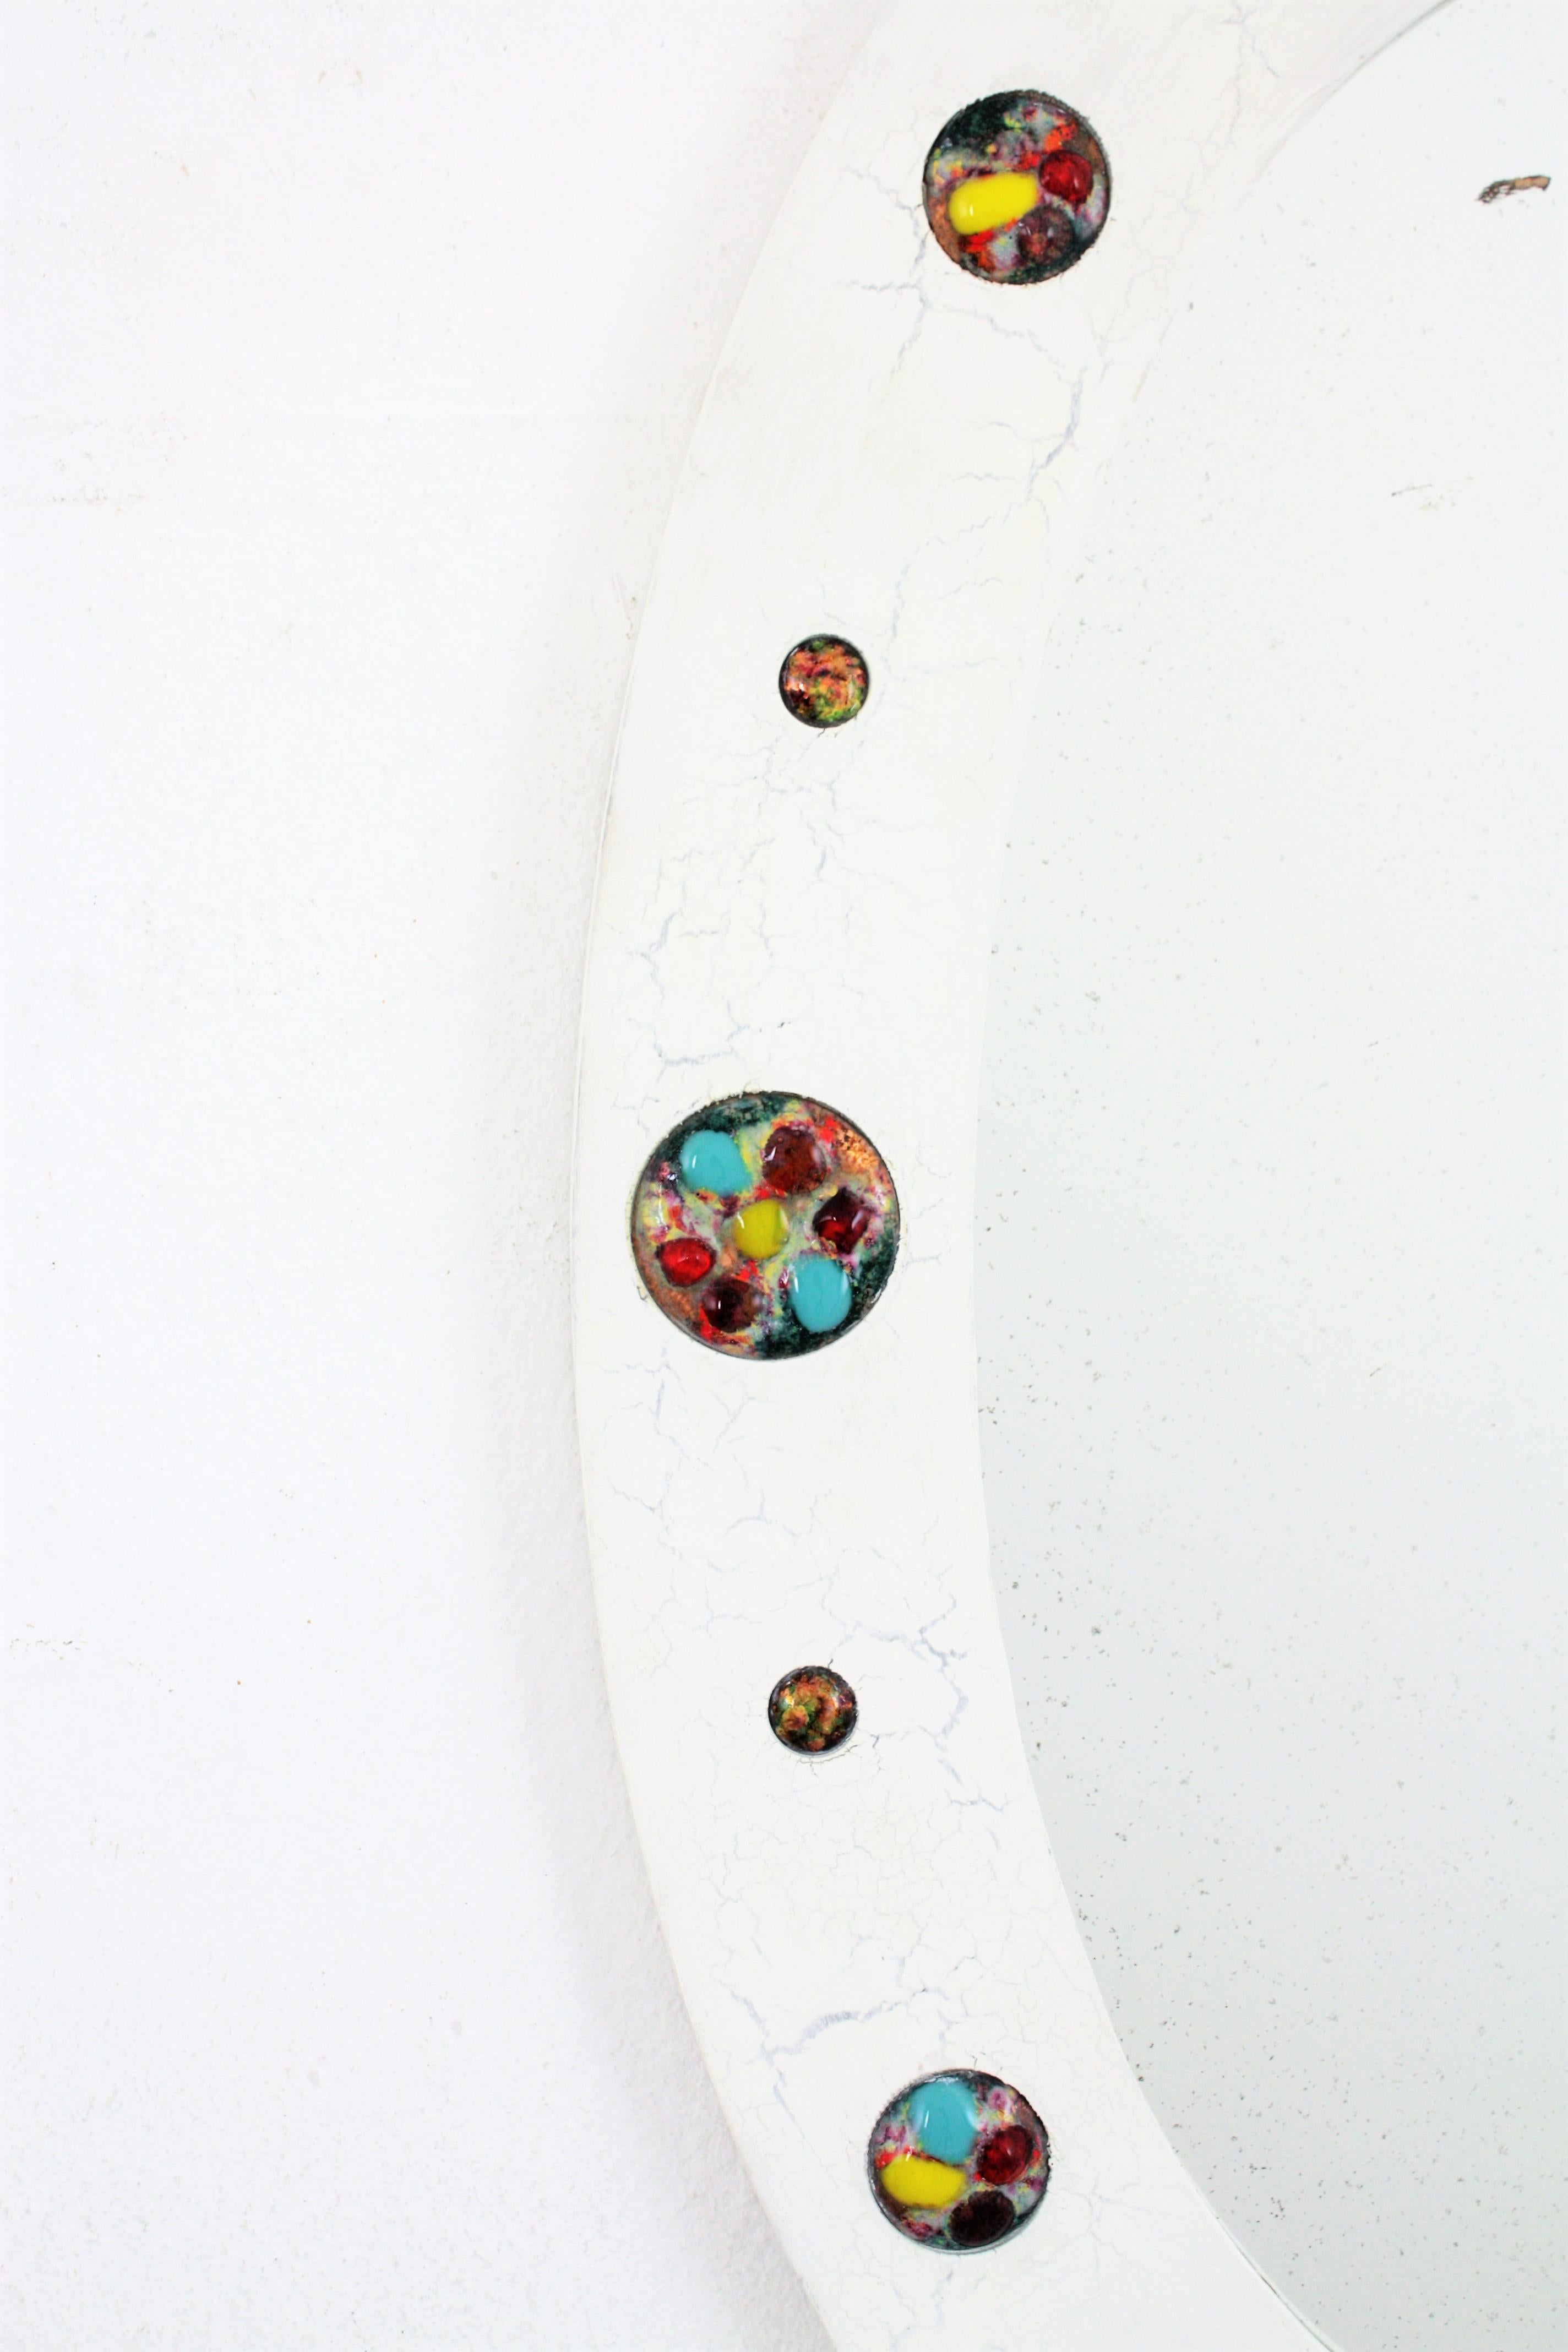 Oval Wall Mirror with Enamel Multi-Color Decorations, 1960s For Sale 1